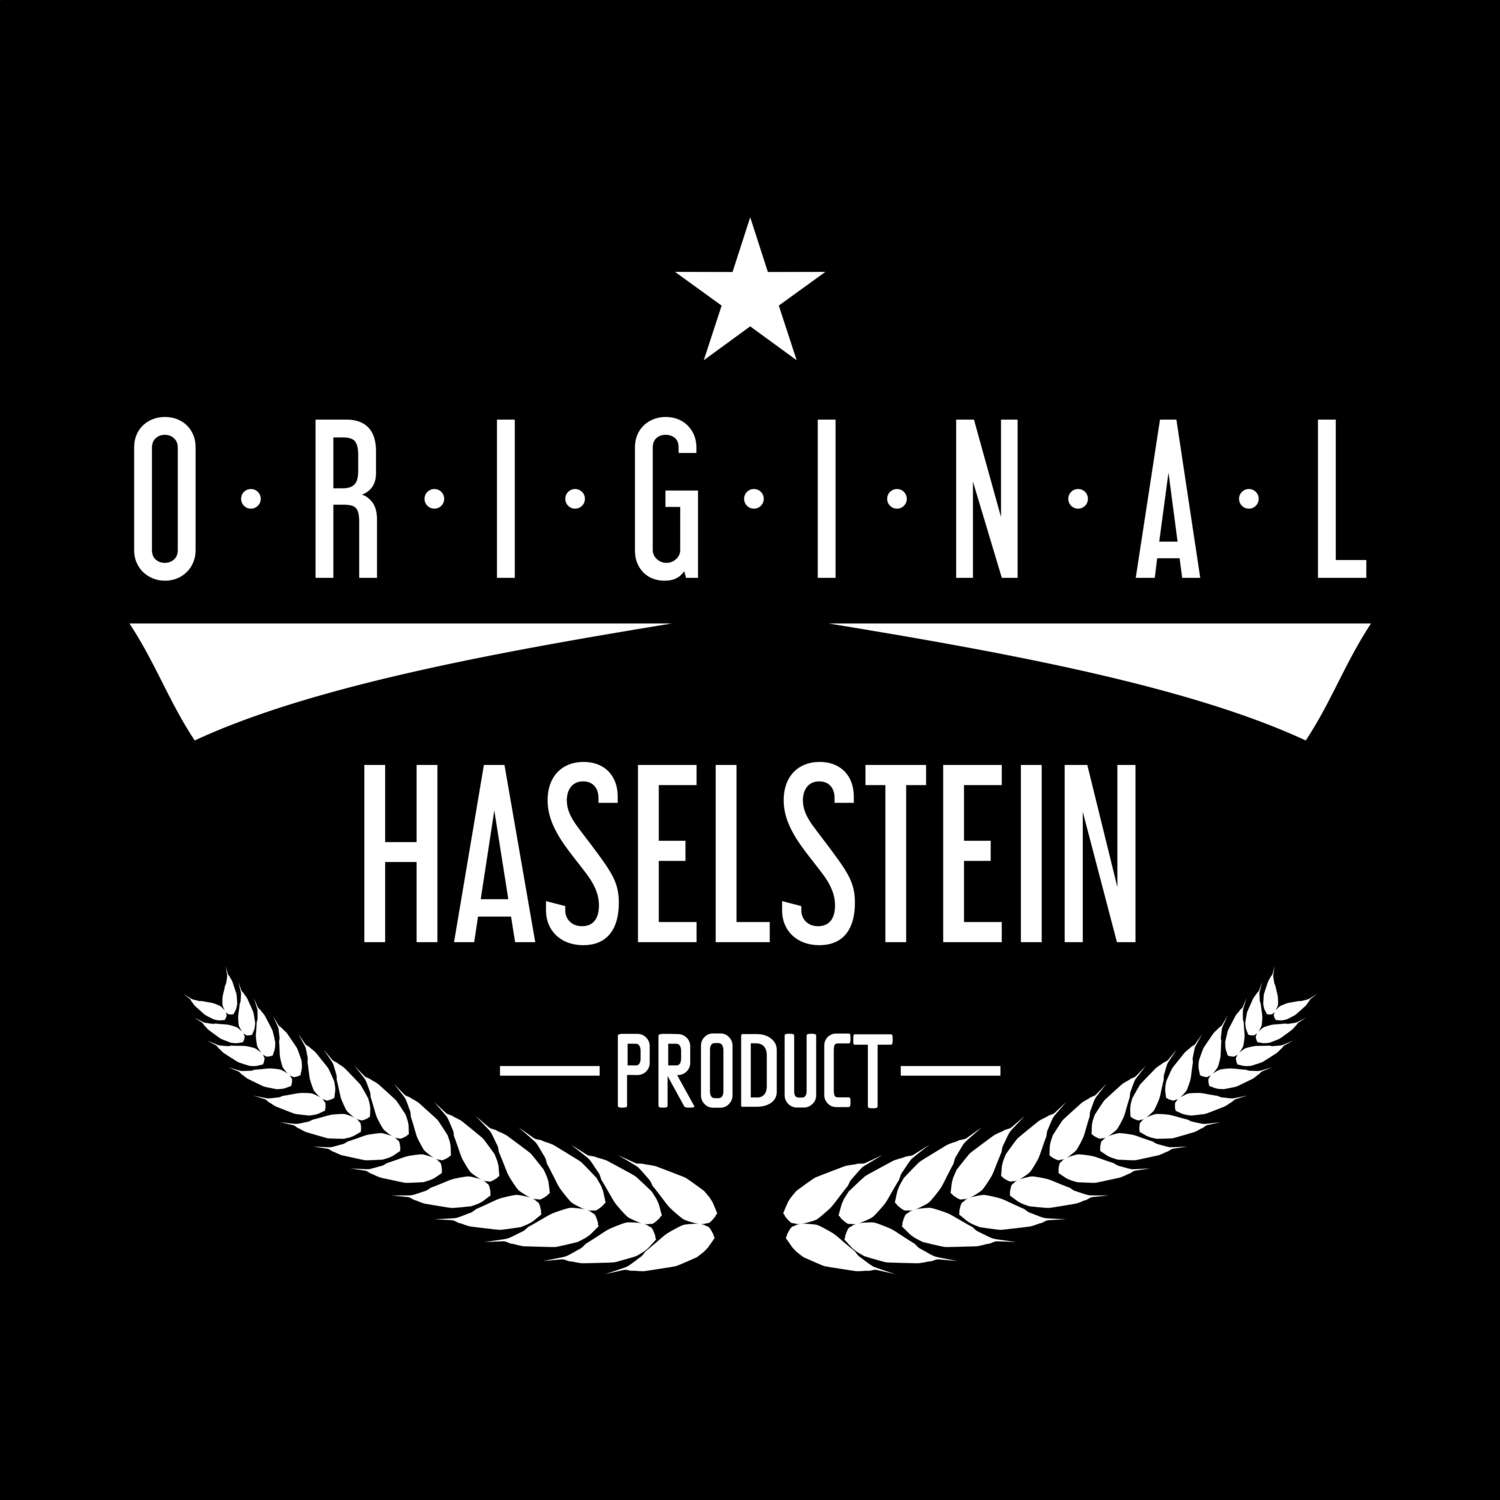 Haselstein T-Shirt »Original Product«